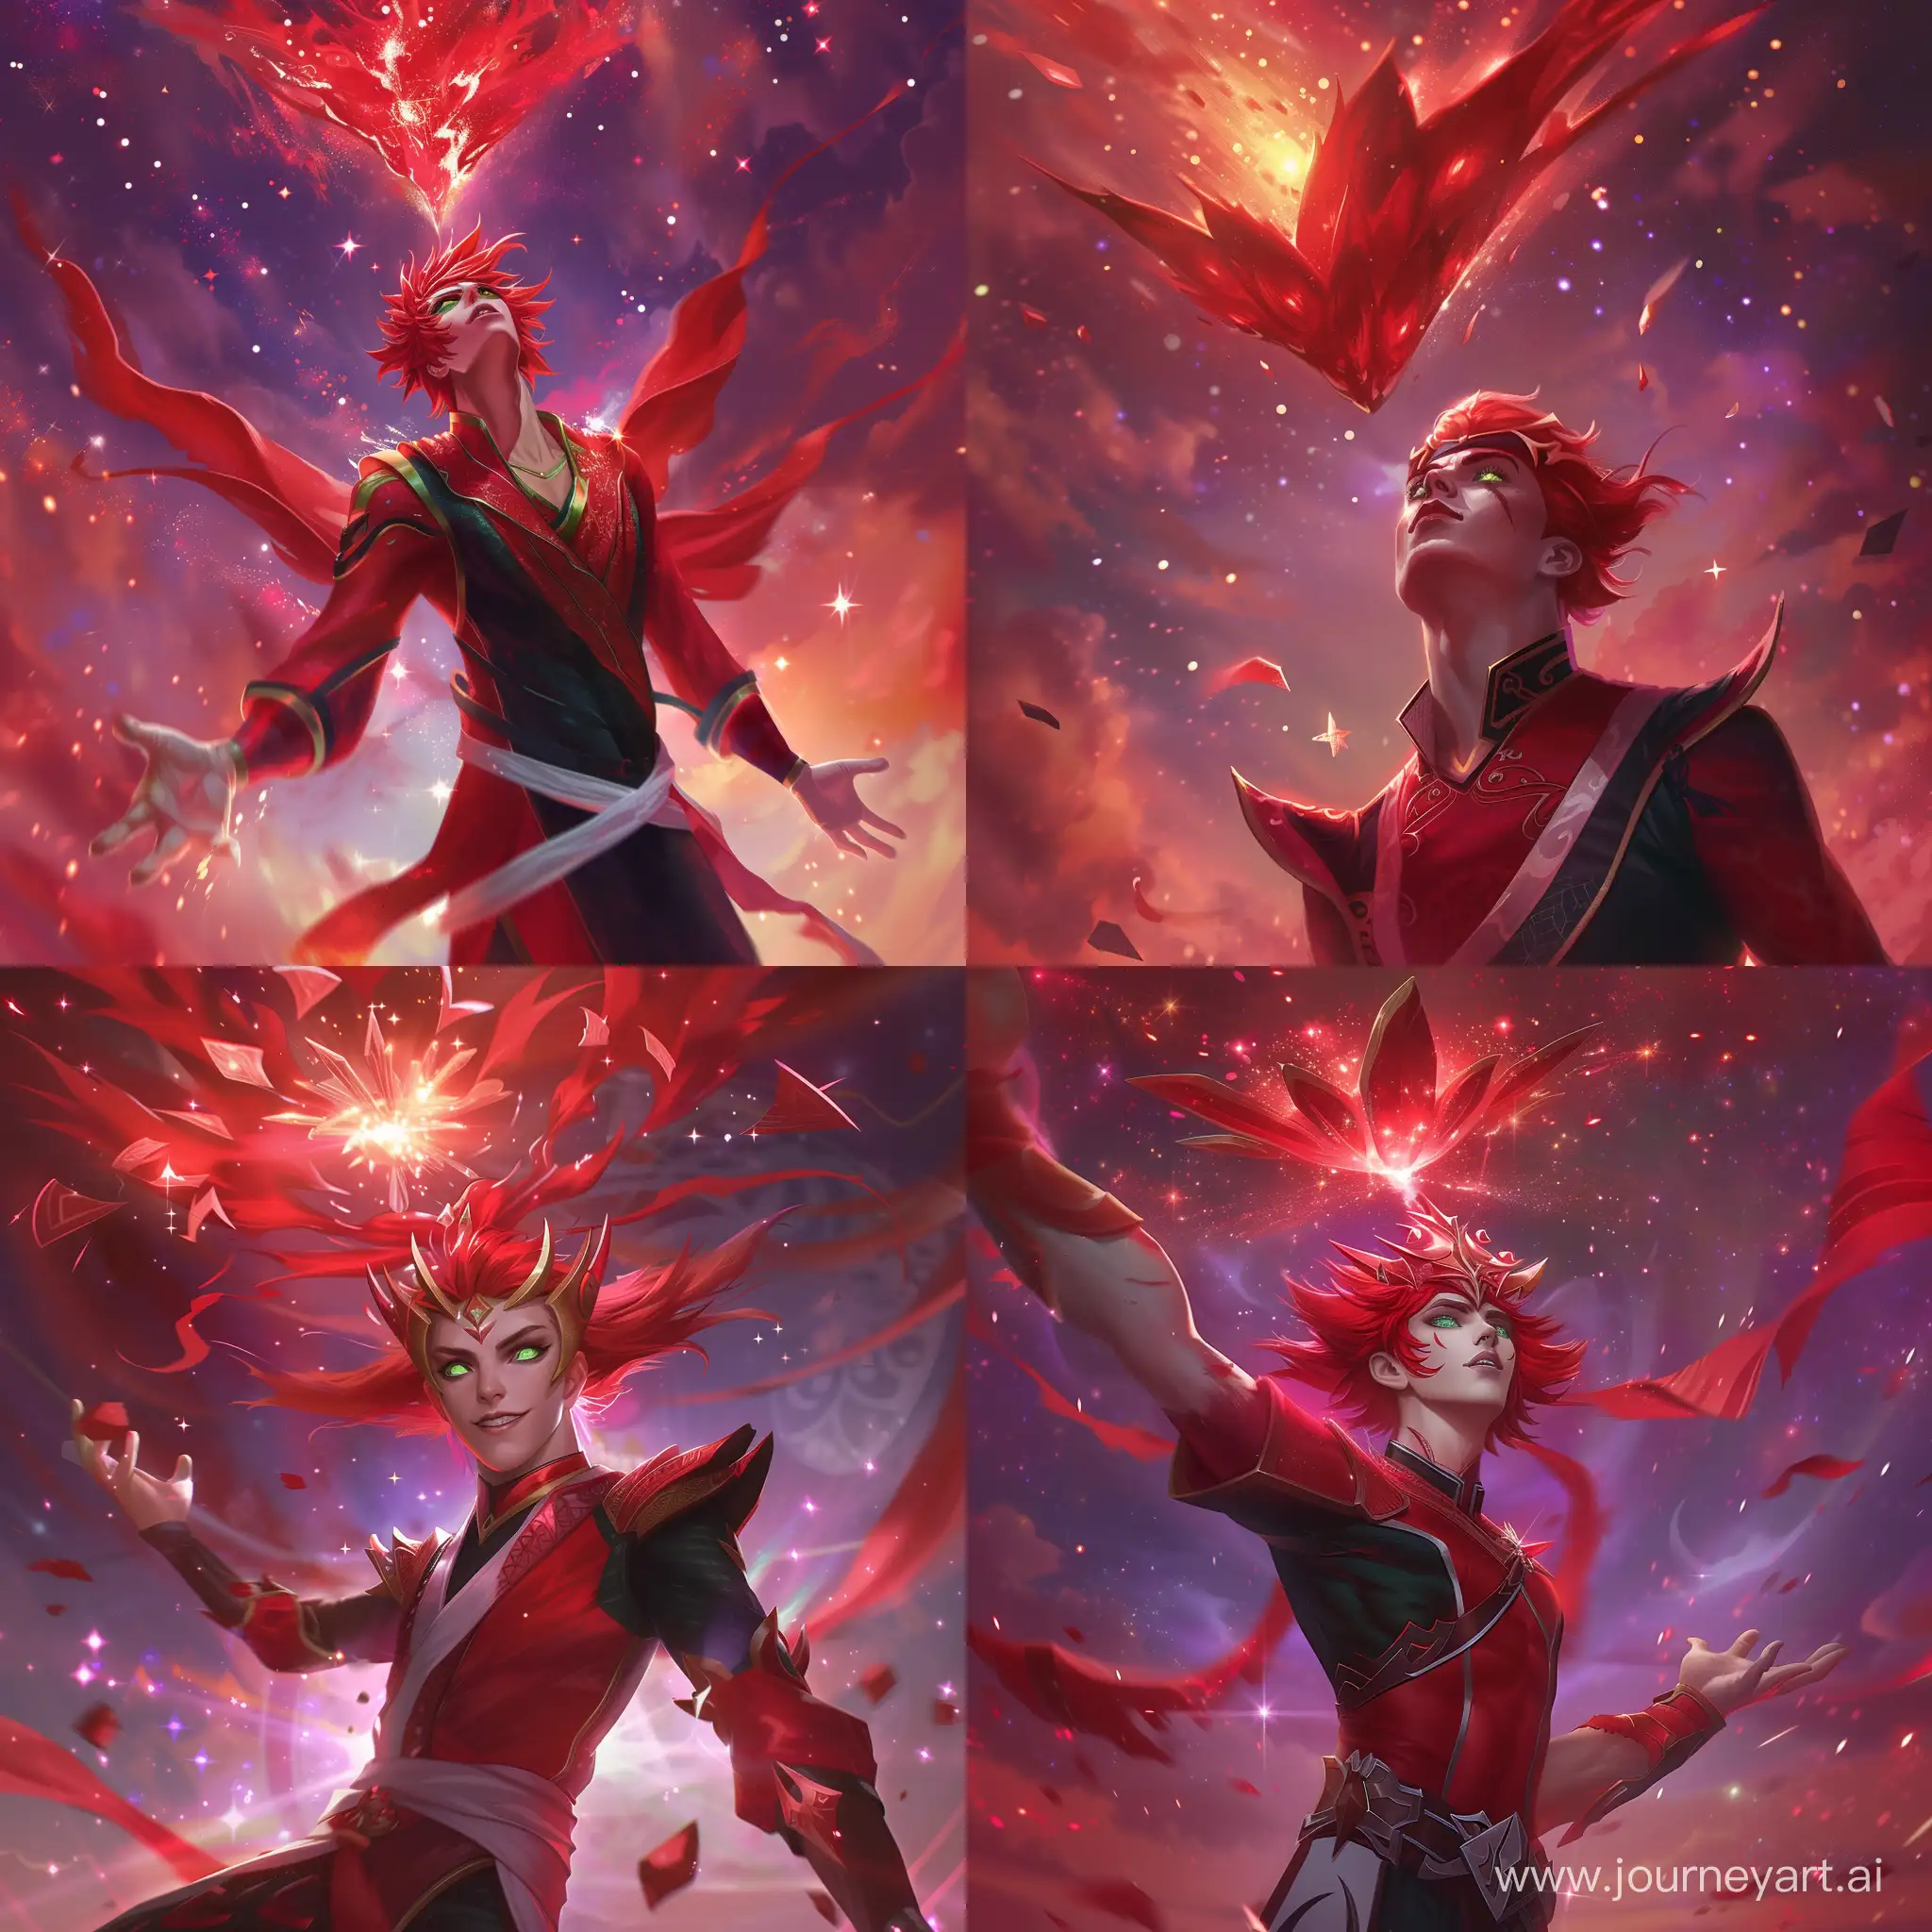 Male-Chaos-Mage-Manipulating-Red-Energy-in-Starry-Sky